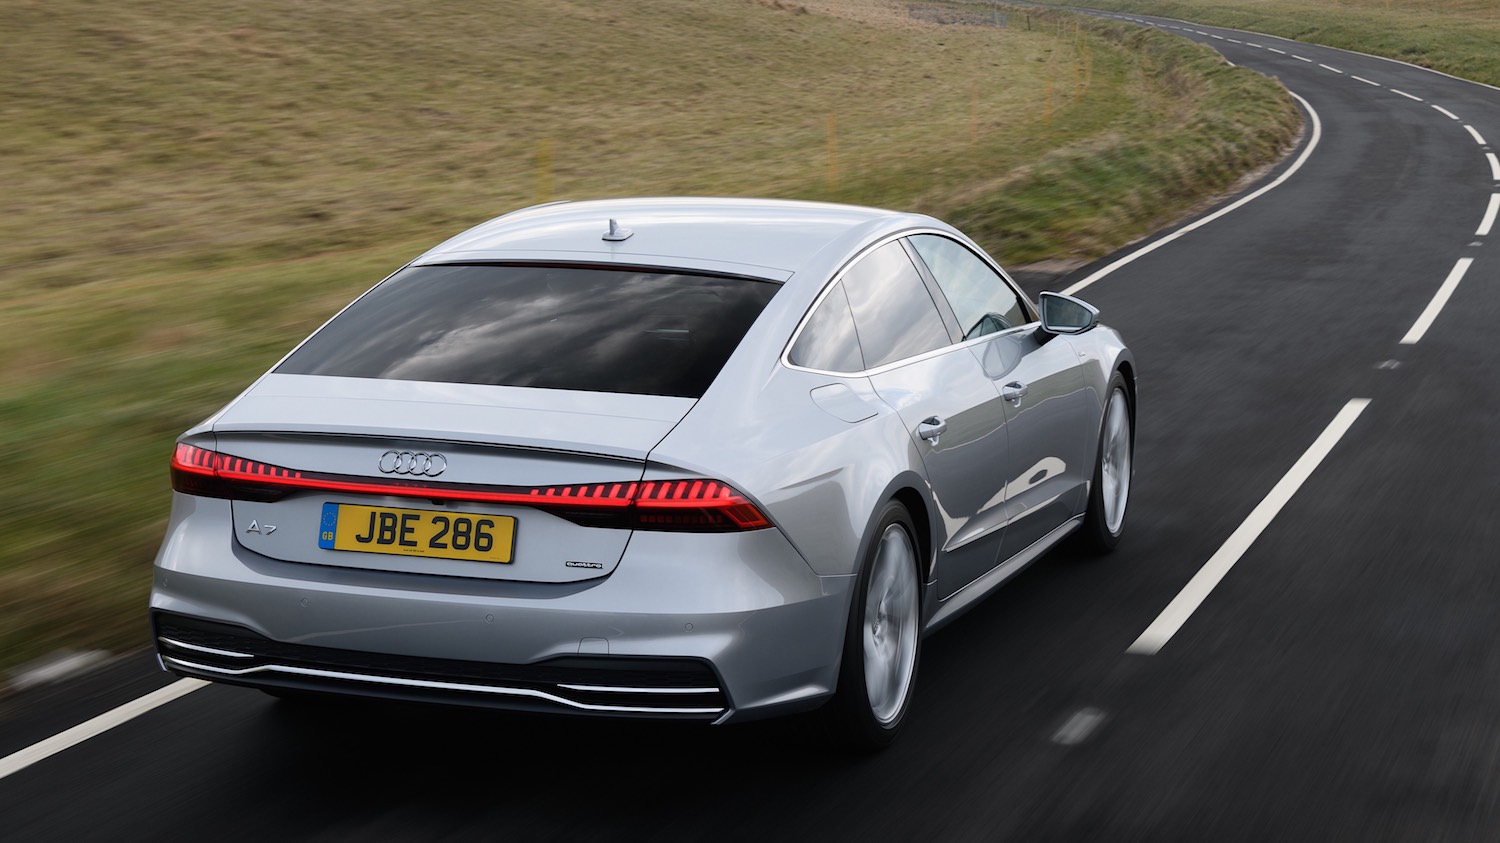 Neil Lyndon motoring correspondent reviews the latest Audi A7 for Drive 19